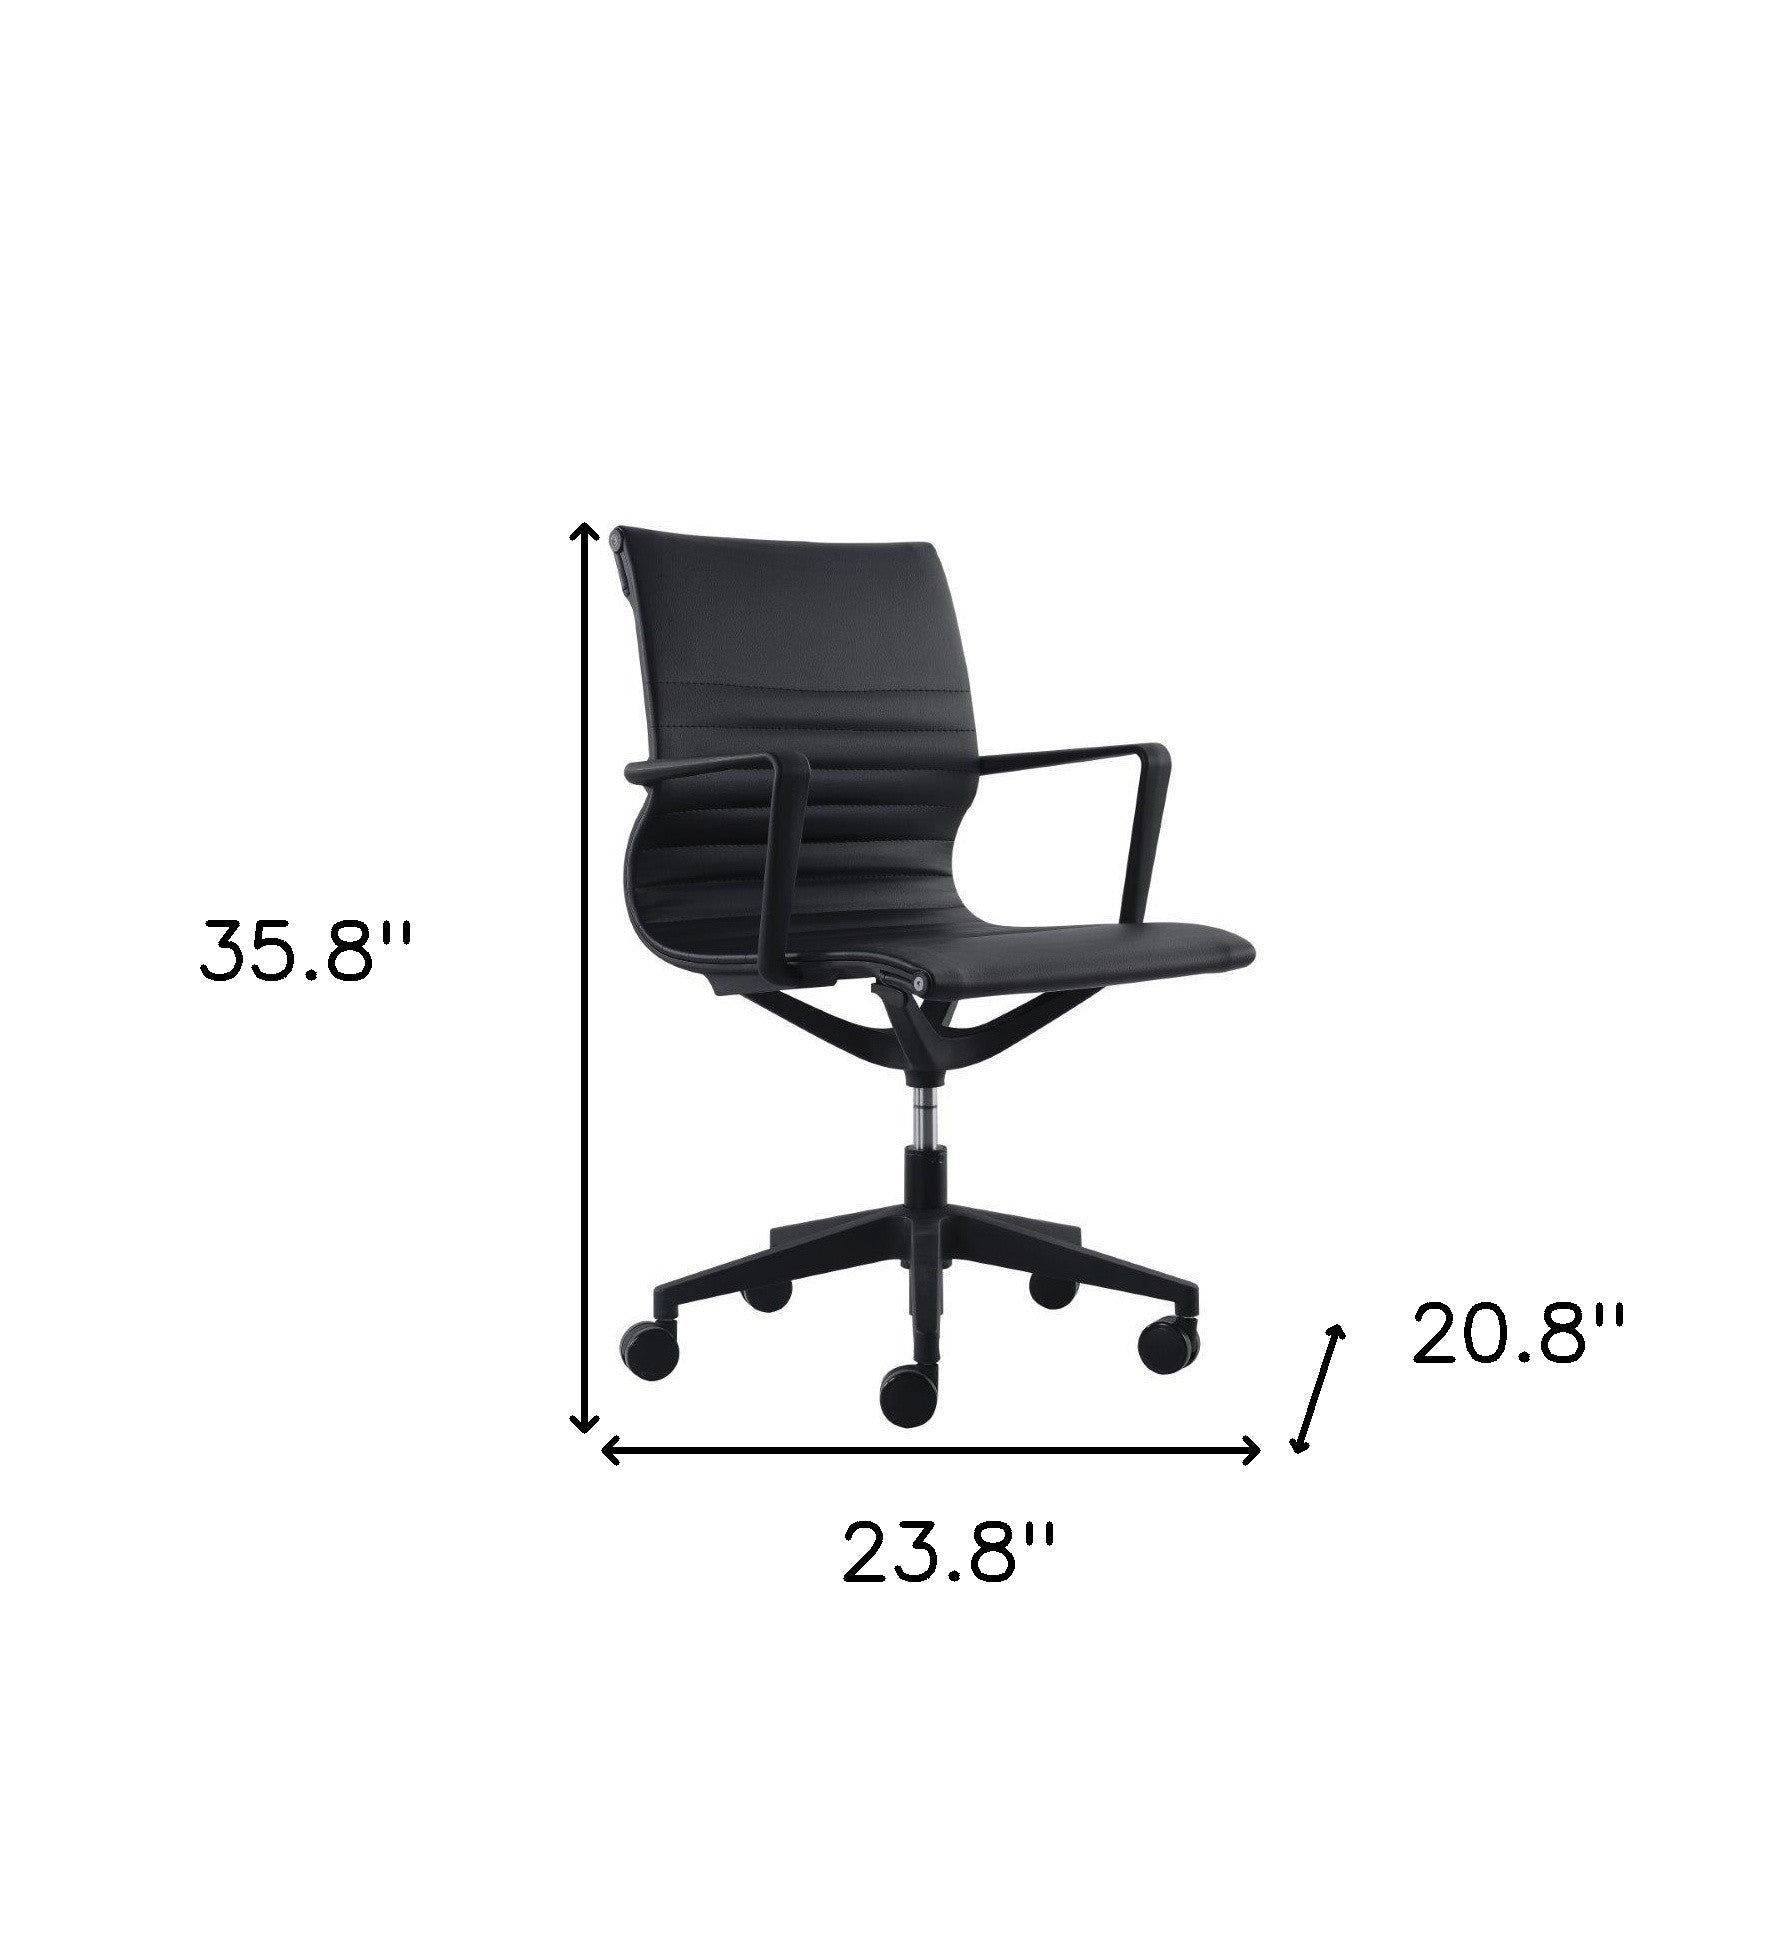 Black Adjustable Swivel Fabric Rolling Office Chair - Tuesday Morning-Office Chairs